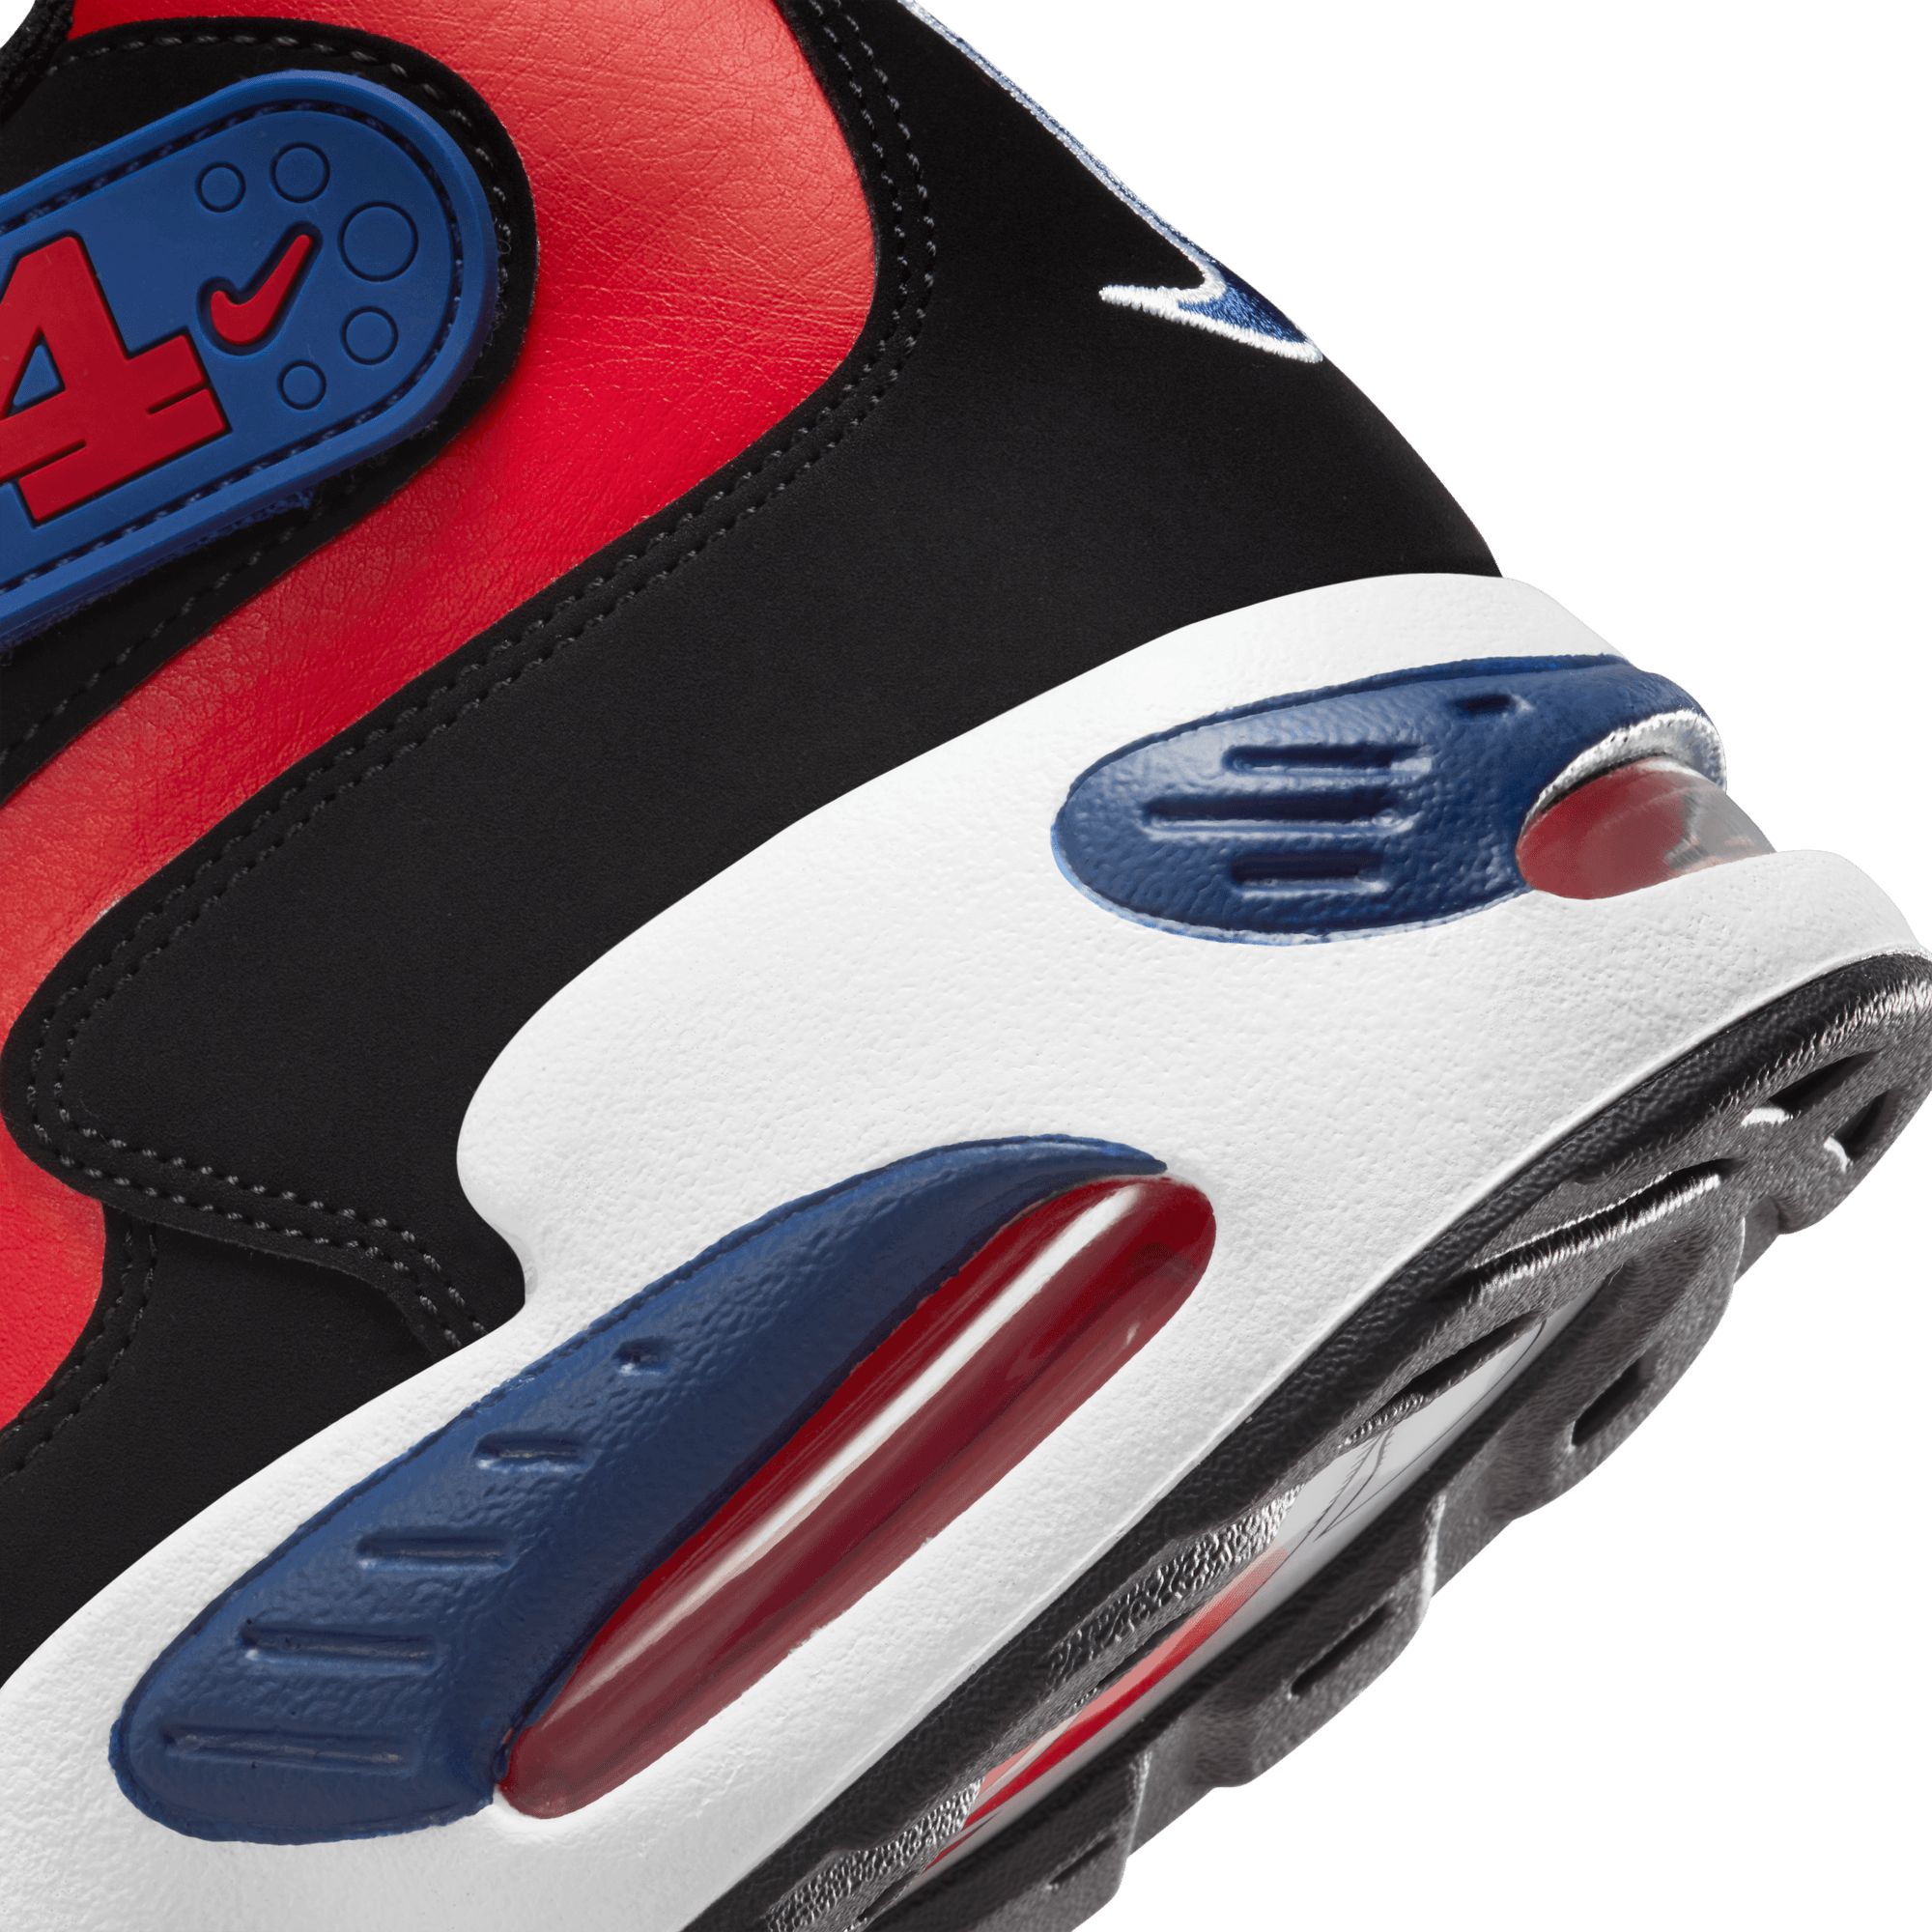 The Nike Air Griffey Max 1 Appears in Black, Red and Royal Blue